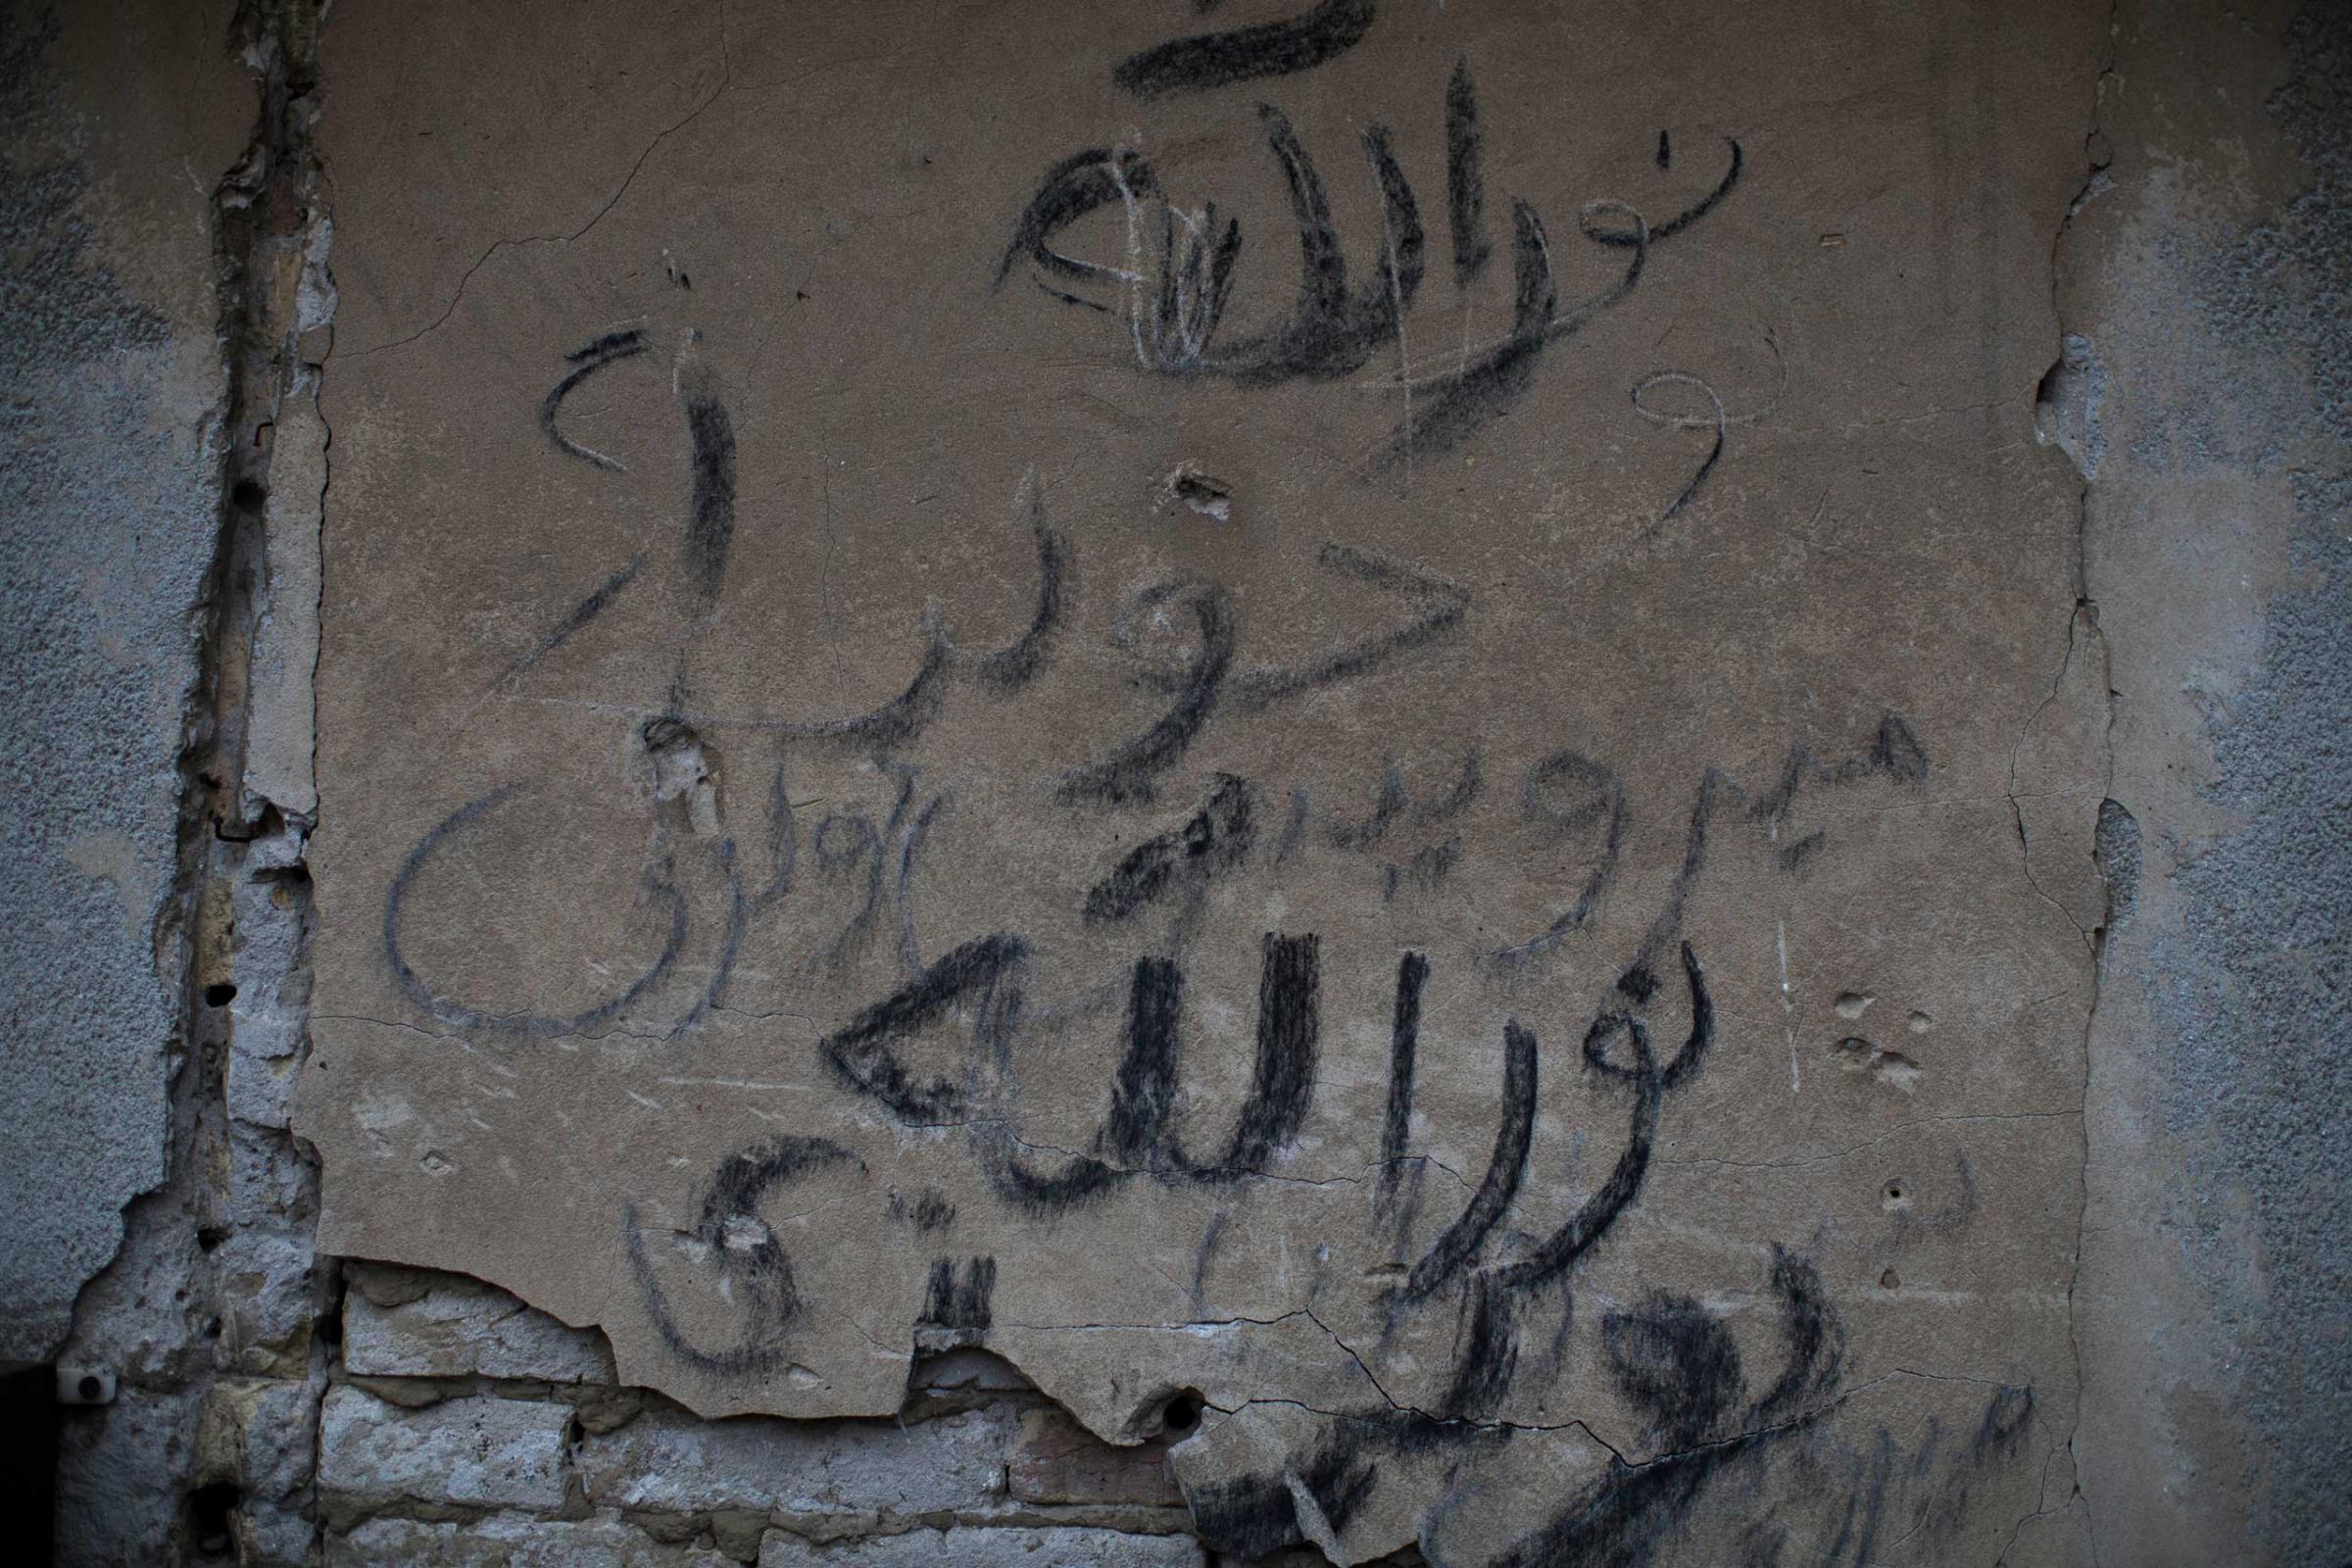 A graffiti in Arabic letters is seen on a wall of an abandoned factory used as a resting point by migrants on the outskirts of Subotica, 90 miles north of Belgrade, Serbia on Feb. 26, 2015.